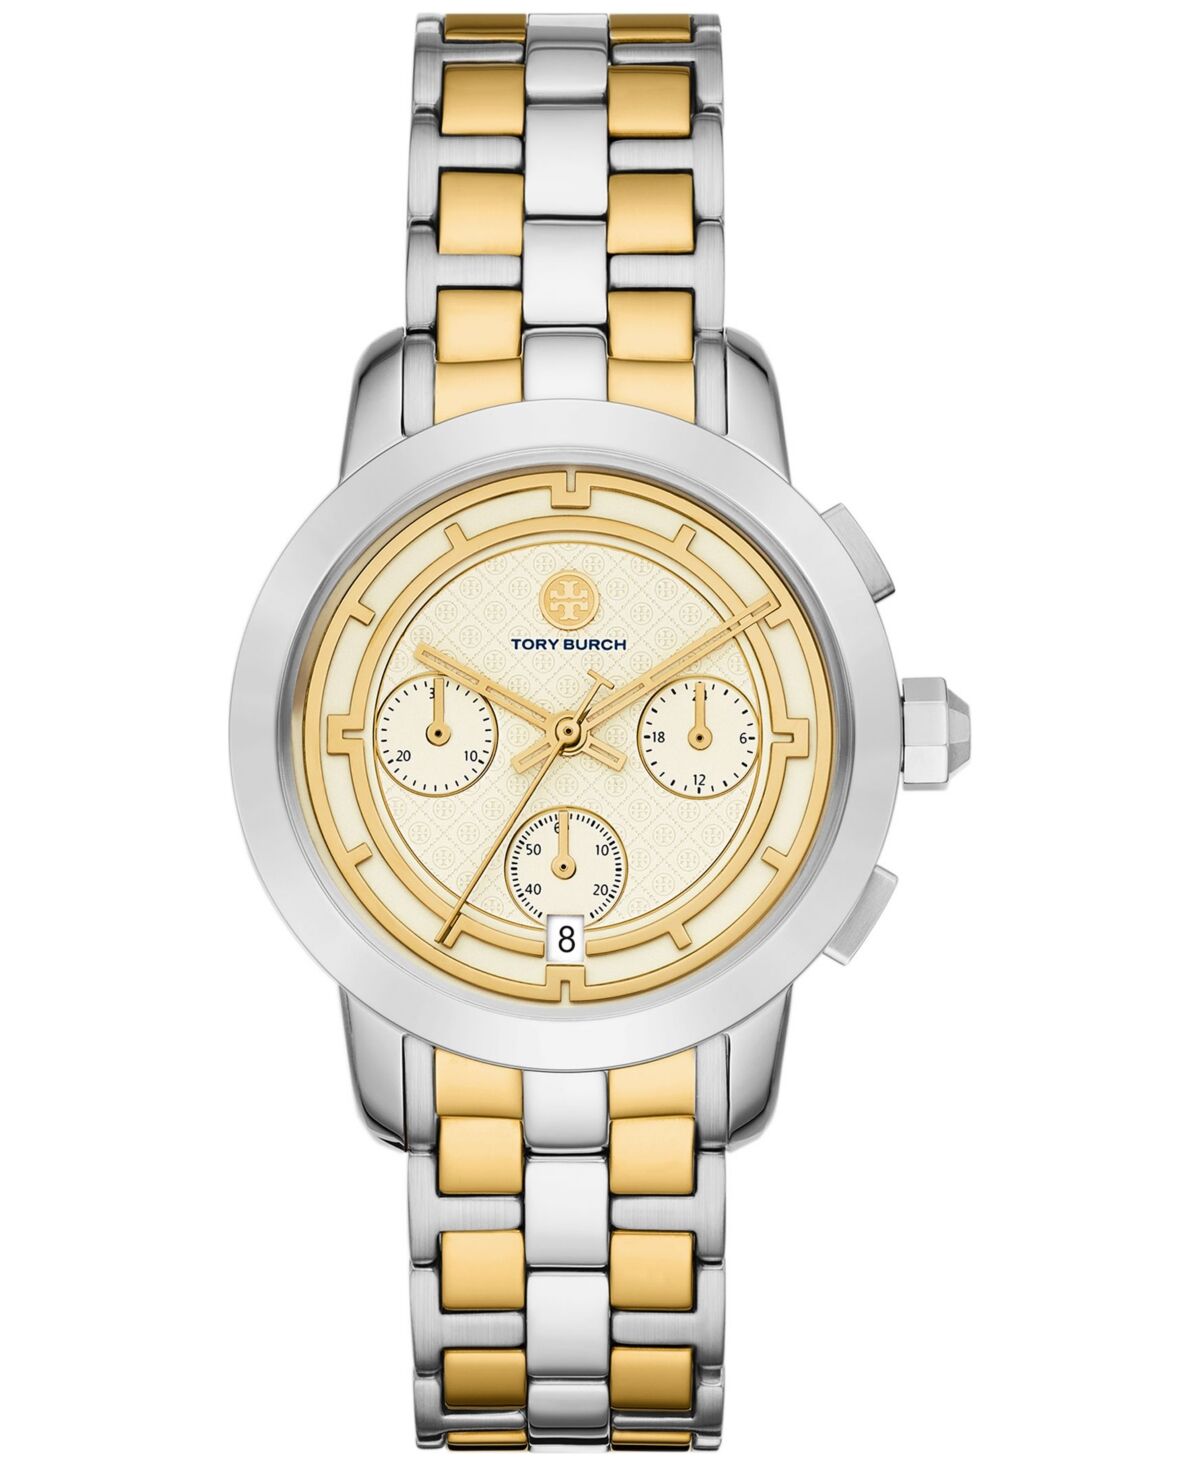 Tory Burch Women's Chronograph Two-Tone Stainless Steel Bracelet Watch 37mm - Multicolor